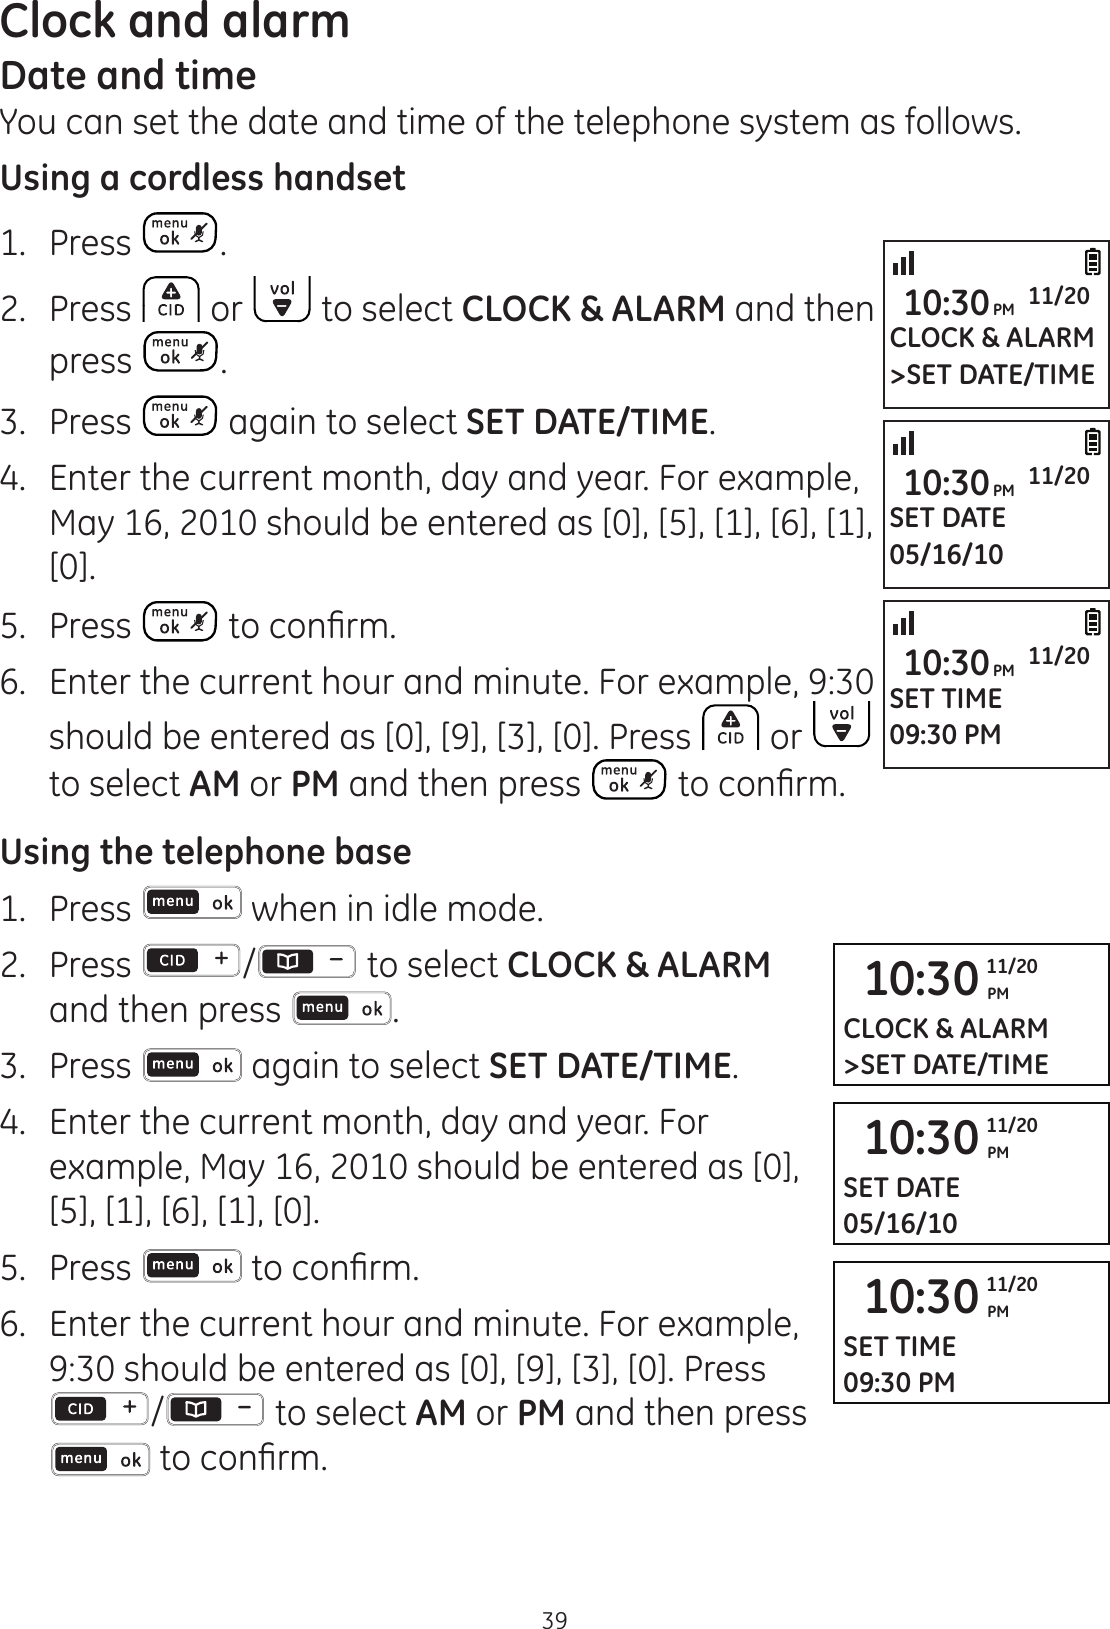 39Clock and alarmDate and timeYou can set the date and time of the telephone system as follows.Using a cordless handset1.  Press .2.  Press   or   to select CLOCK &amp; ALARM and then press  .3.  Press   again to select SET DATE/TIME.4.  Enter the current month, day and year. For example, May 16, 2010 should be entered as [0], [5], [1], [6], [1], [0].5.  Press  WRFRQ¿UP6.  Enter the current hour and minute. For example, 9:30 should be entered as [0], [9], [3], [0]. Press   or   to select AM or PM and then press  WRFRQ¿UPUsing the telephone base1.  Press   when in idle mode. 2.   Press  /  to select CLOCK &amp; ALARM and then press  .3.  Press   again to select SET DATE/TIME.4.  Enter the current month, day and year. For example, May 16, 2010 should be entered as [0], [5], [1], [6], [1], [0].5.  Press  WRFRQ¿UP6.  Enter the current hour and minute. For example, 9:30 should be entered as [0], [9], [3], [0]. Press /  to select AM or PM and then press WRFRQ¿UPCLOCK &amp; ALARM&gt;SET DATE/TIME10:30PM 11/20SET DATE05/16/1010:30PM 11/20SET TIME09:30 PM10:30PM 11/2010:30 PM11/20CLOCK &amp; ALARM&gt;SET DATE/TIME10:30 PM11/20SET DATE05/16/1010:30 PM11/20SET TIME09:30 PM